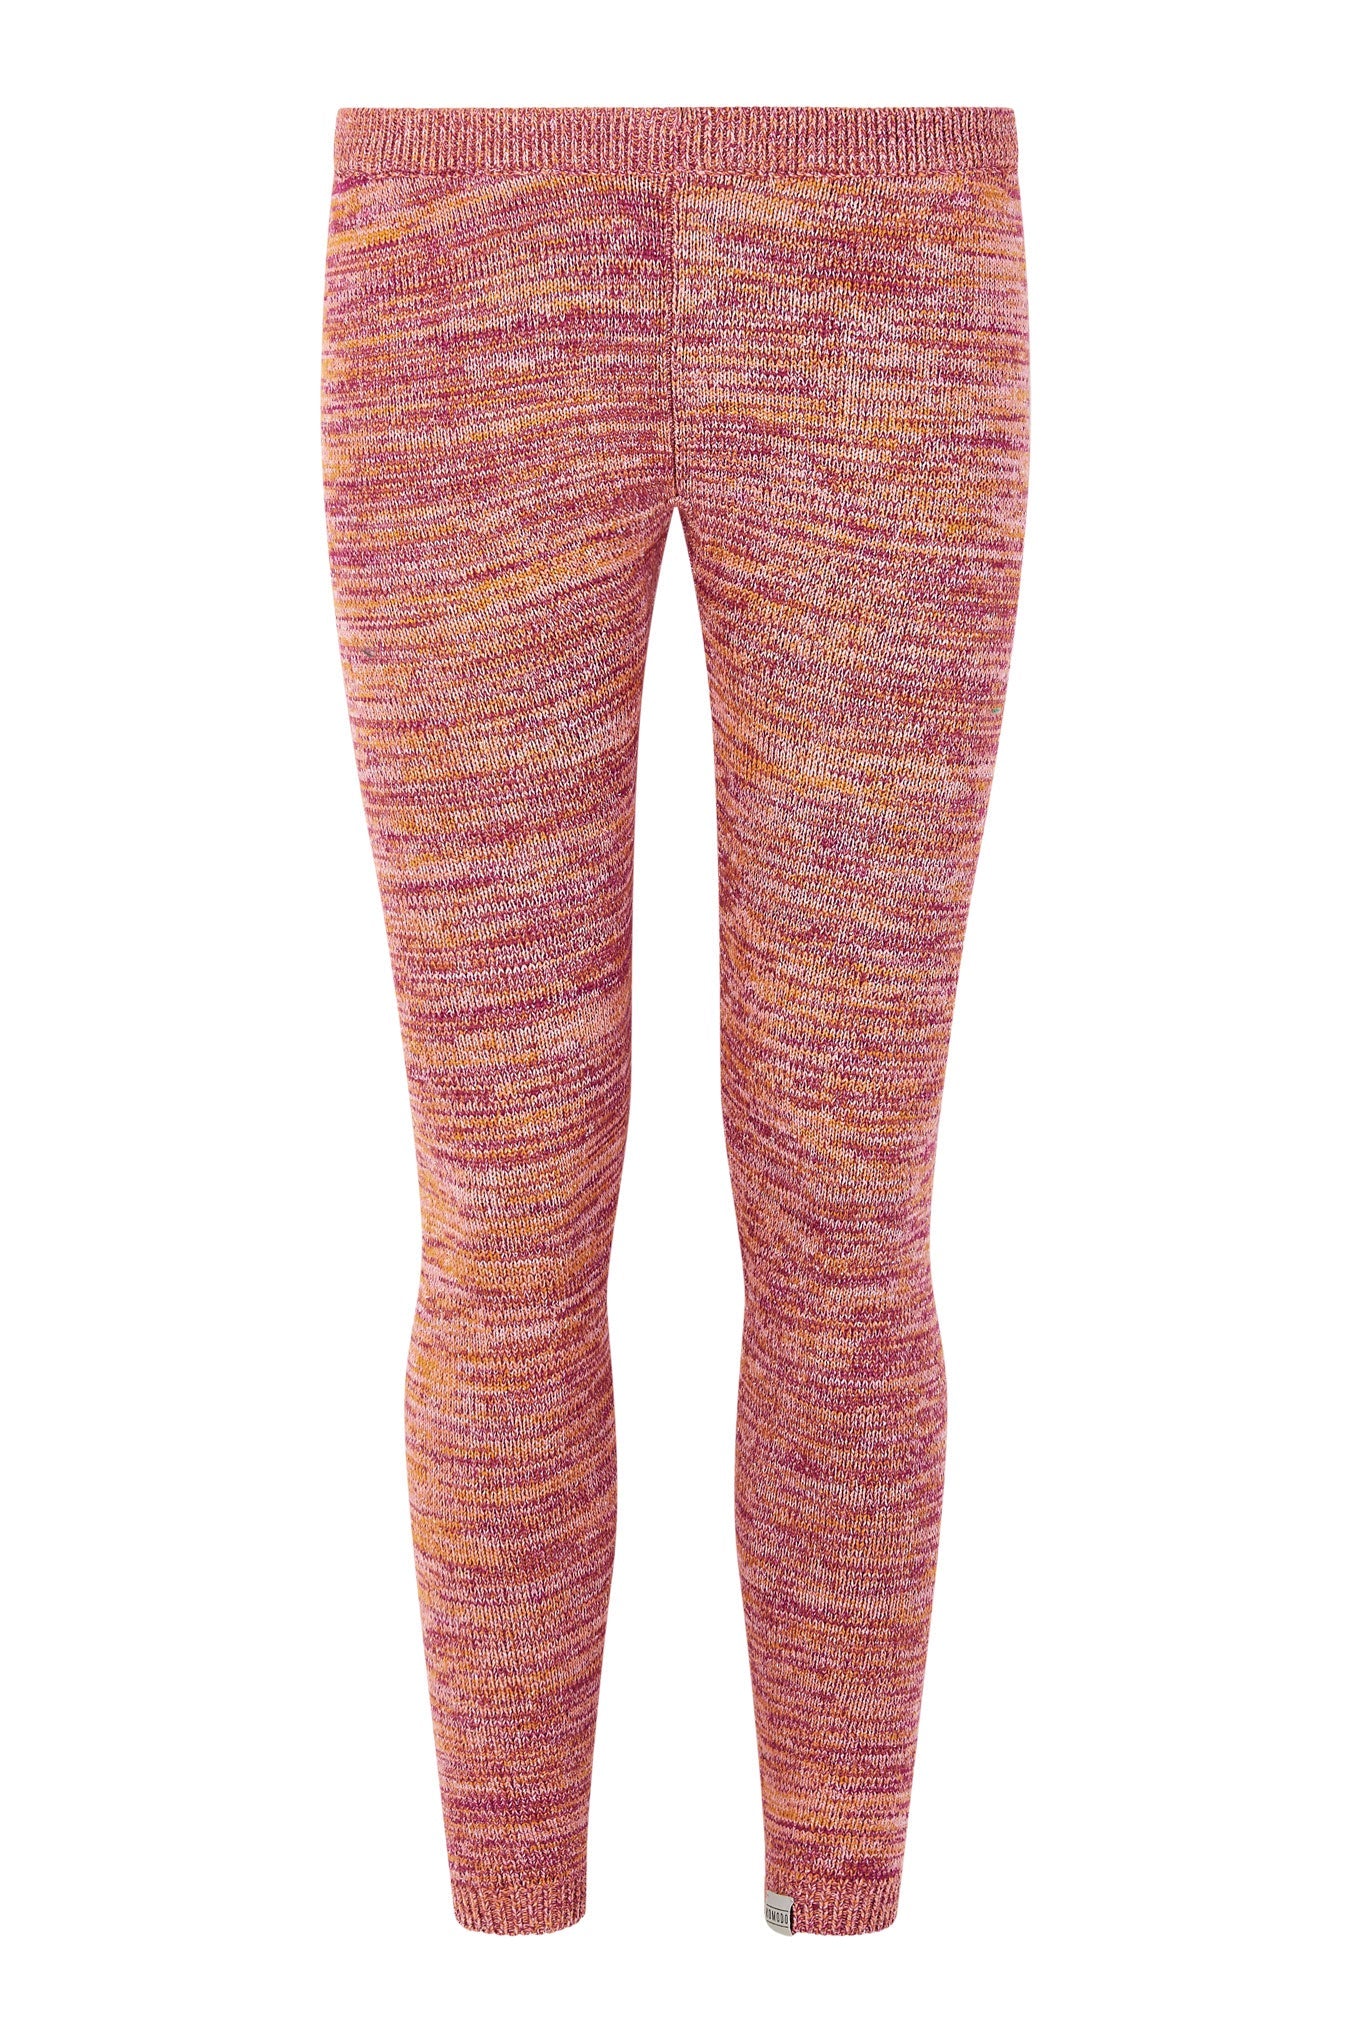 Colorful LELI leggings made from 100% organic cotton from Komodo